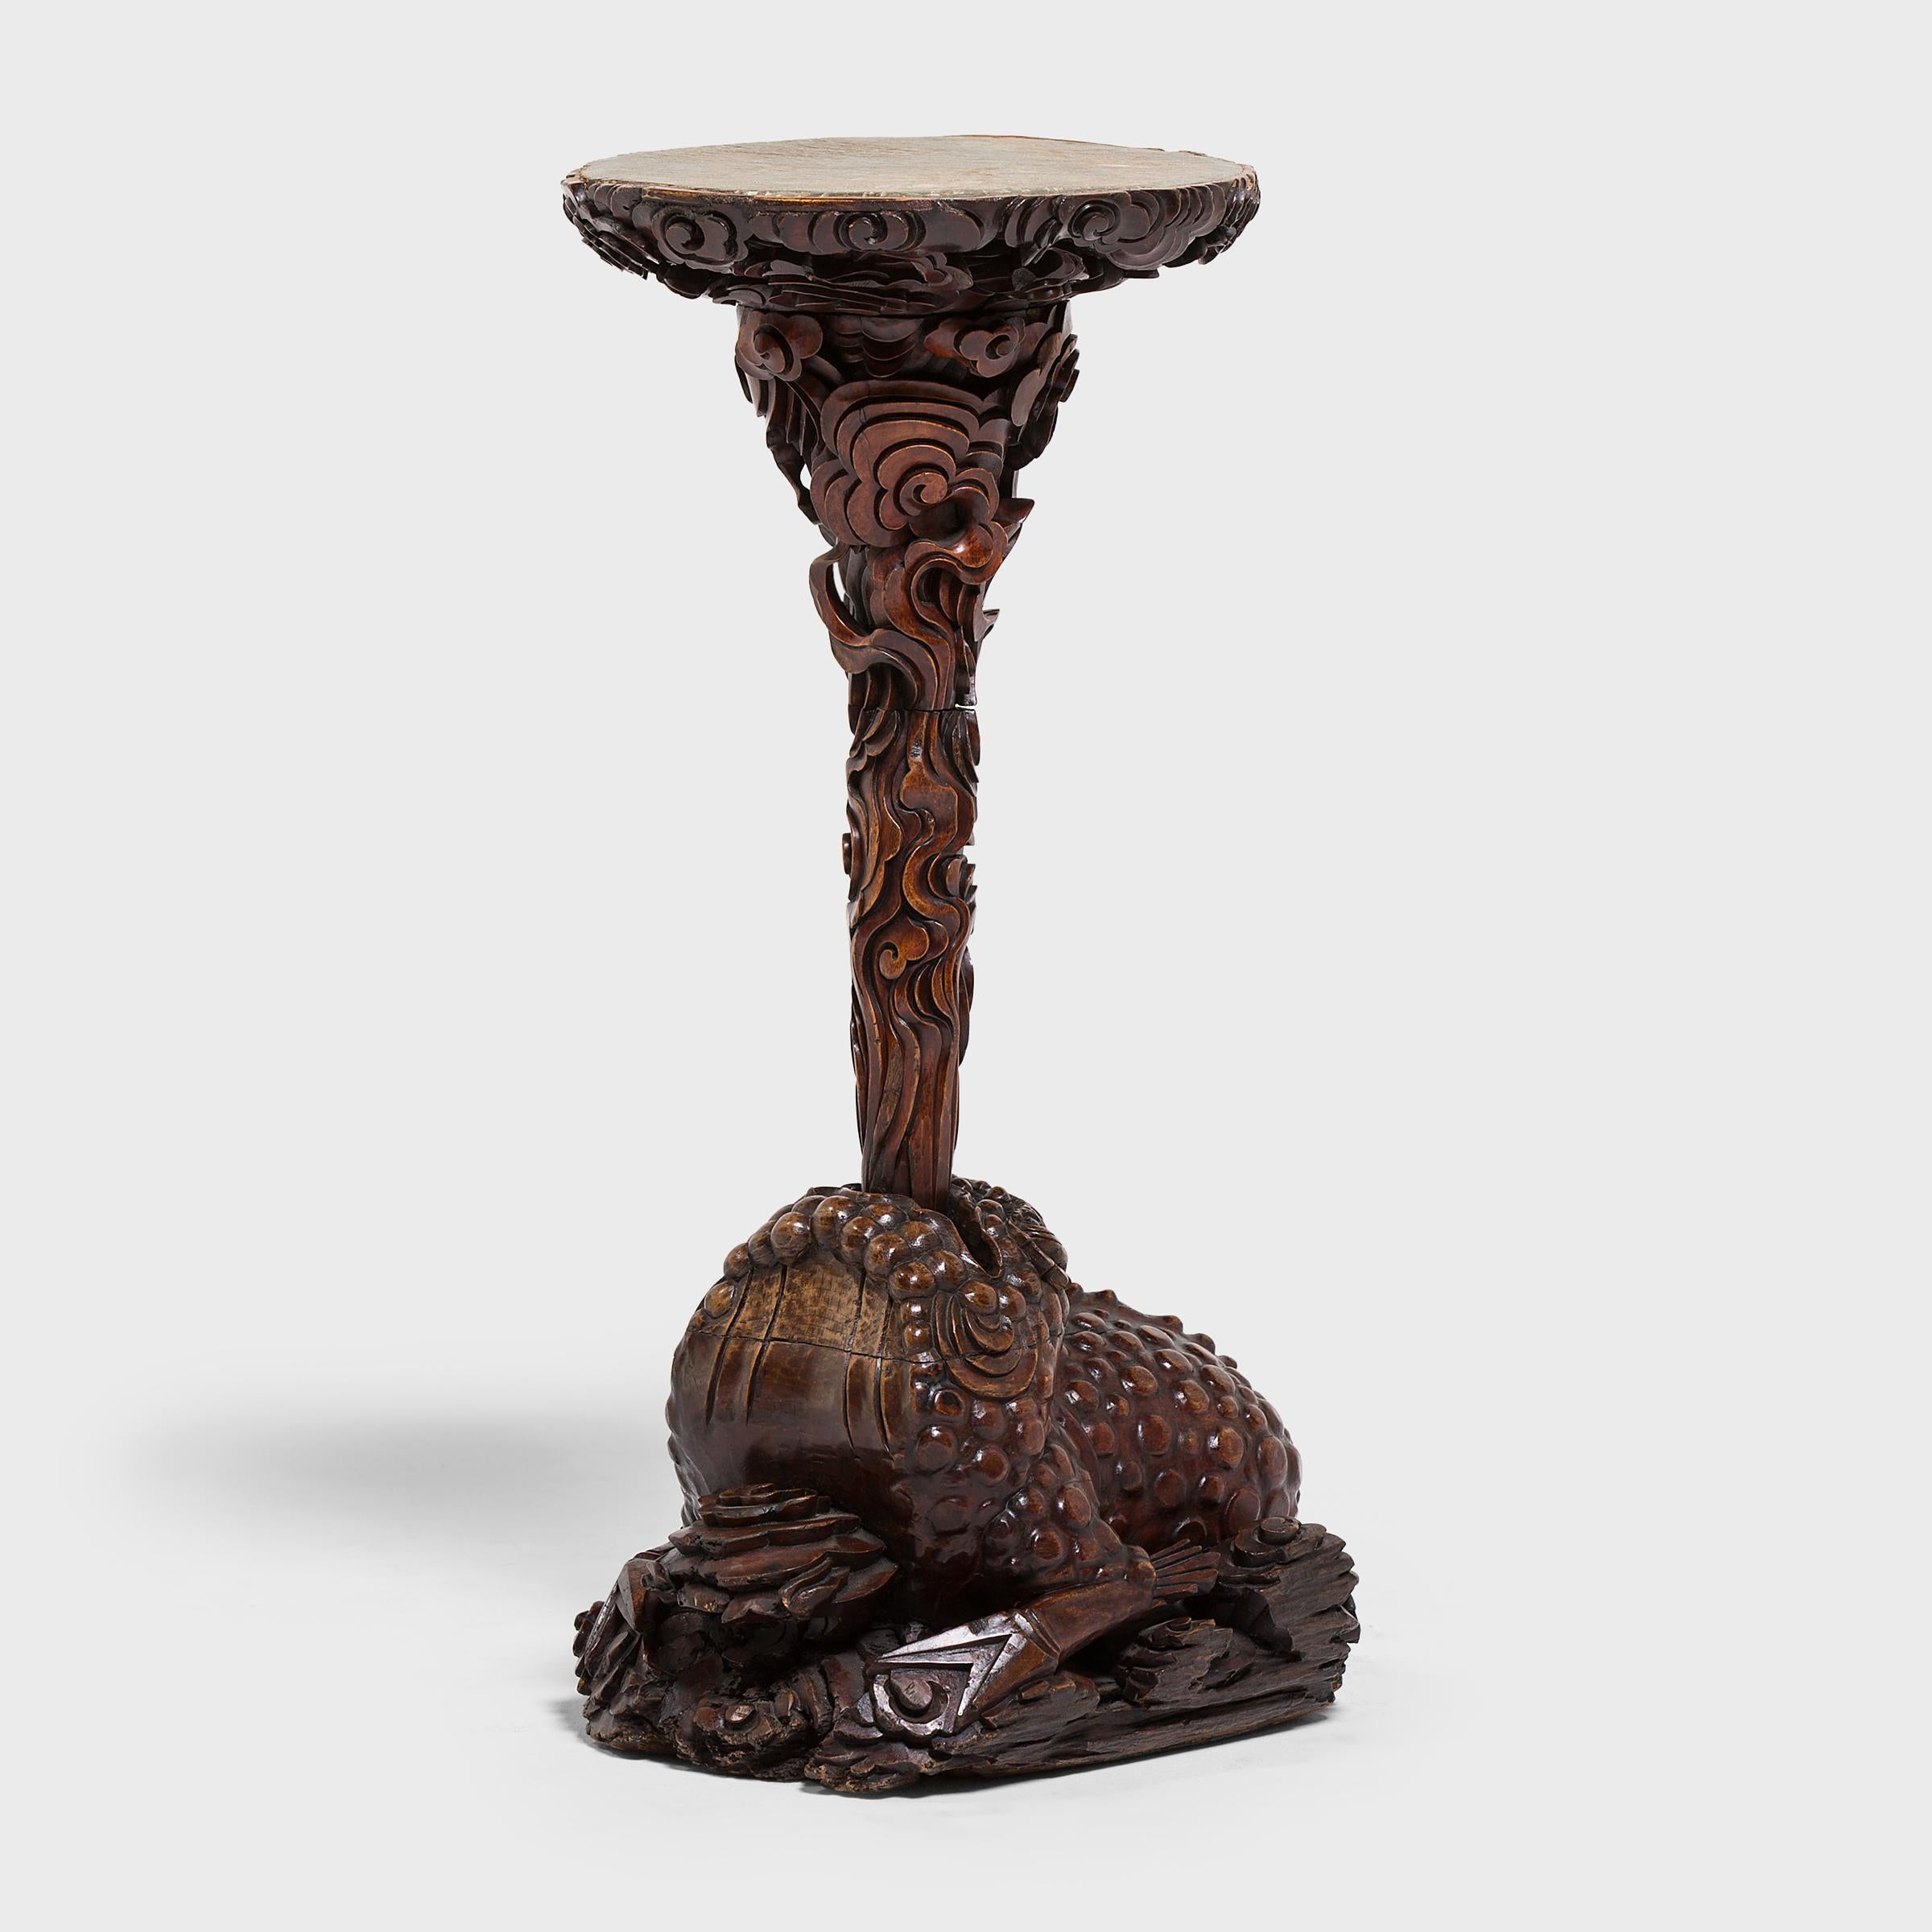 Each of these 19th century incense stands is intricately carved in the form of a mythical three-legged toad, a potent symbol of luck and prosperity. Known as the Jin Chan, or Money Toad, this mythical amphibian is the animal companion of Daoist